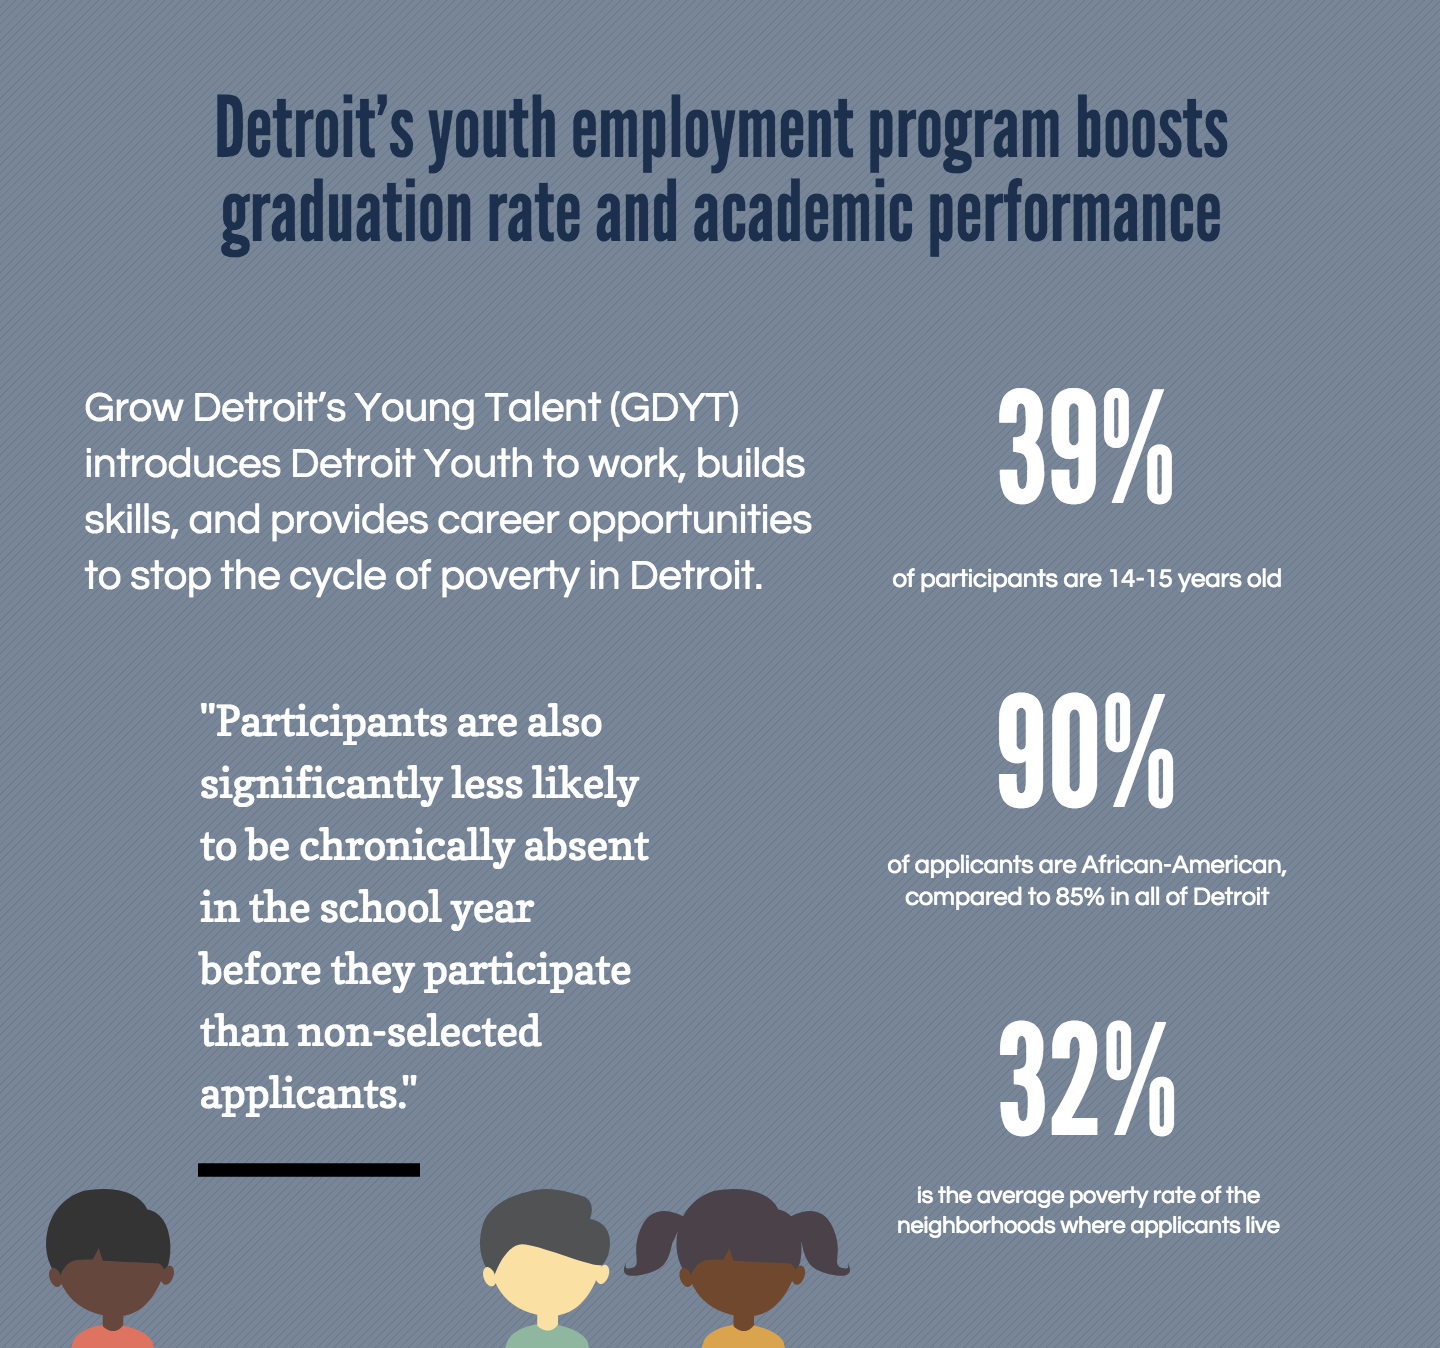 Detroit's youth employment program boosts graduation rate and academic performance. Grow Detroit's Young Talent (GDYT) introduces Detroit Youth to work, builds skills, and provides career opportunities to stop the cycle of poverty in Detroit. 39% of participants are 14-15 years old. 90% of applicants are African-American, compared to 85% in all of Detroit. 32% is the average poverty rate of the neighborhoods where applicants live. "Participants are also significantly less likely to be chronically absent in the school year before they participate than non-selected applicants."